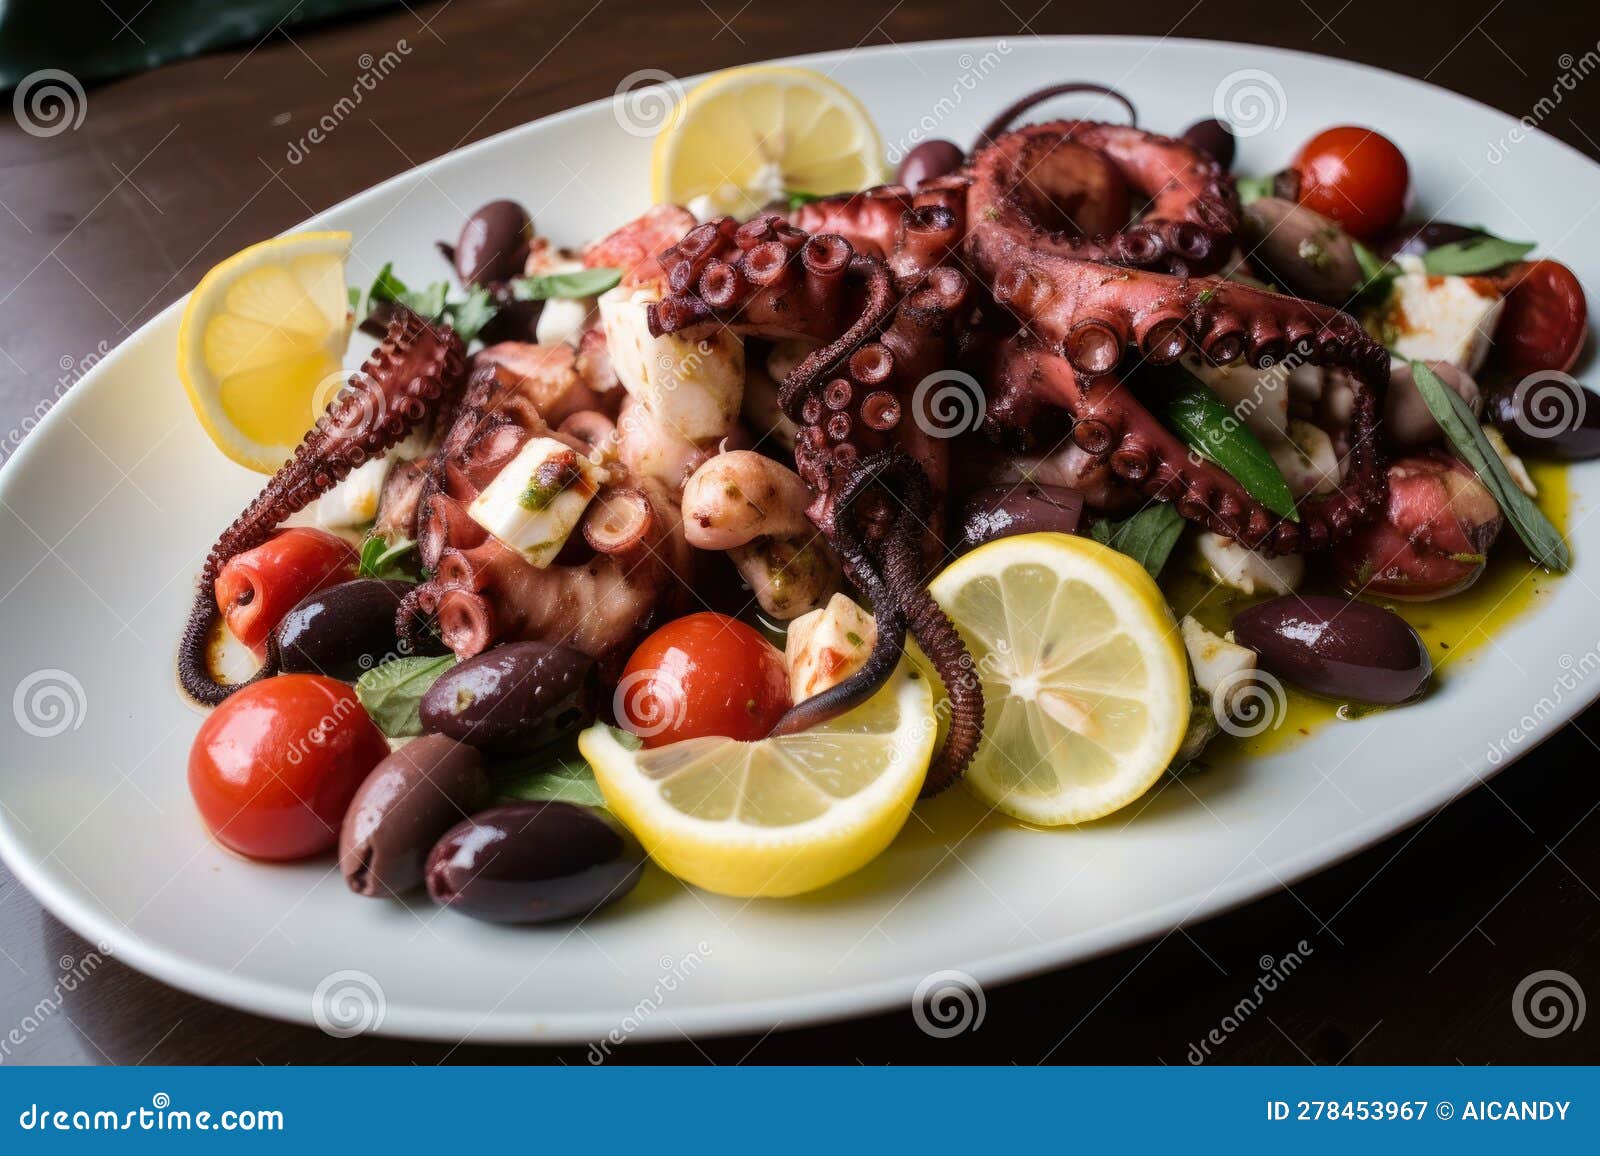 sumptuous grilled octopus tentacles tossed with creamy feta cheese, diced tomatoes, and briny olives in a light lemon vinaigrette